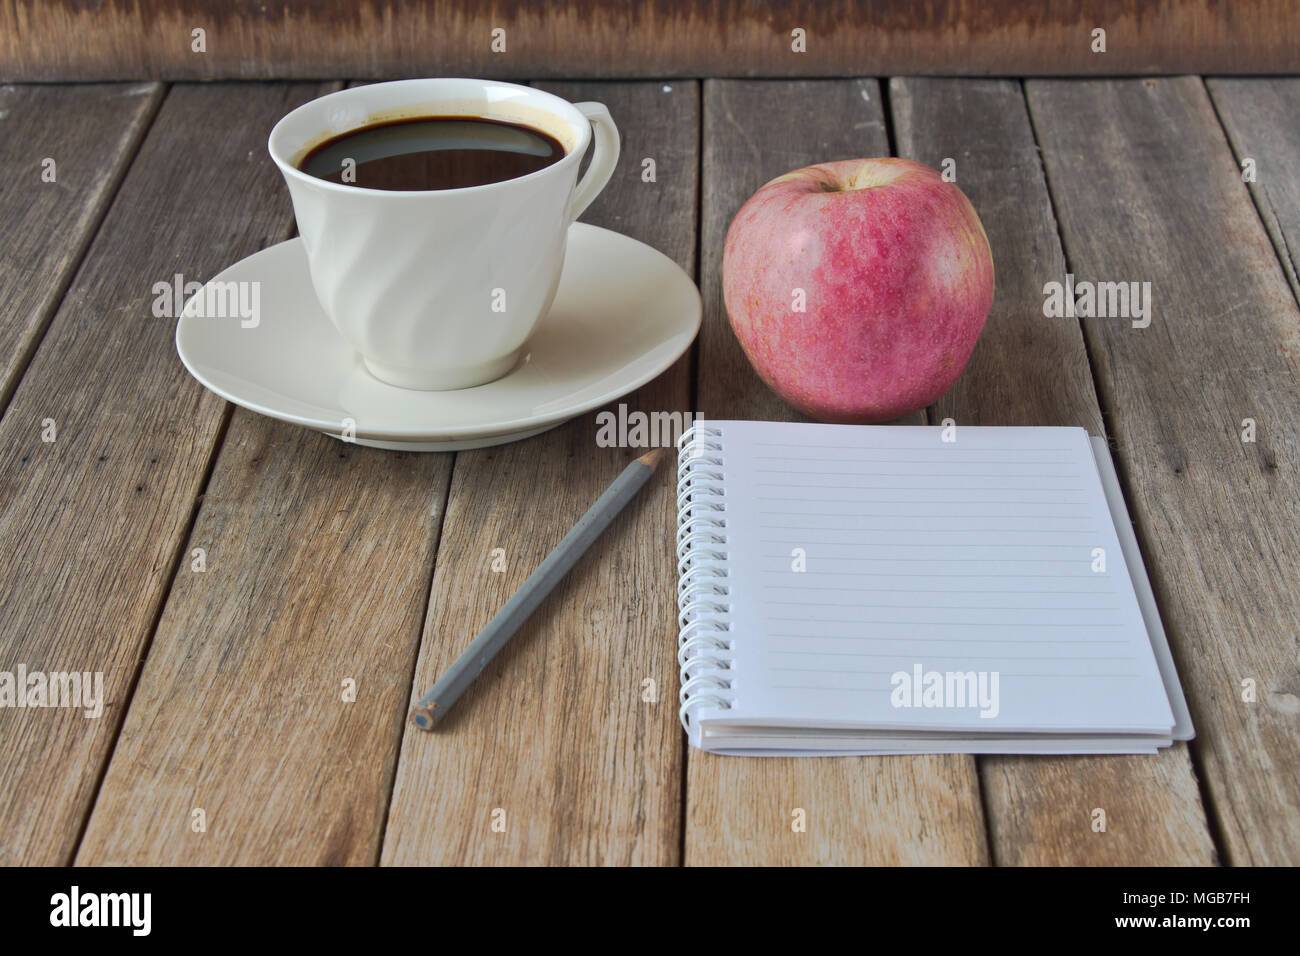 Notebook with pencil, coffee cup and red apple on wood table Stock Photo